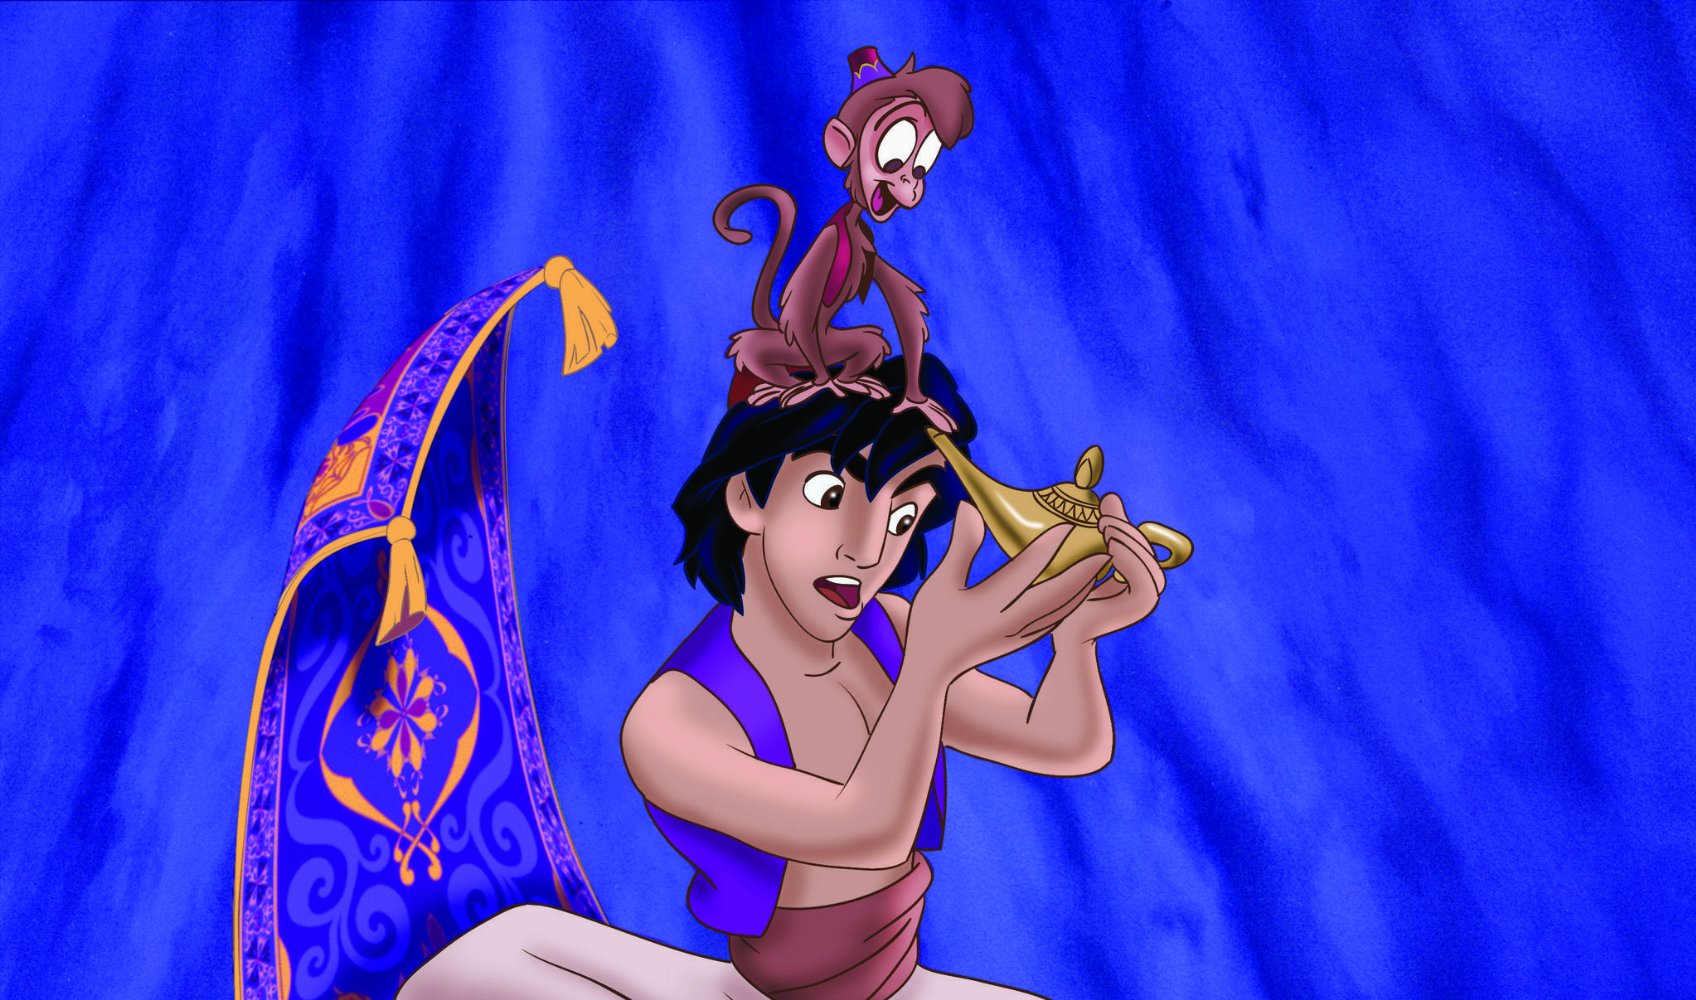 Live-action Aladdin film to be directed by Guy Ritchie